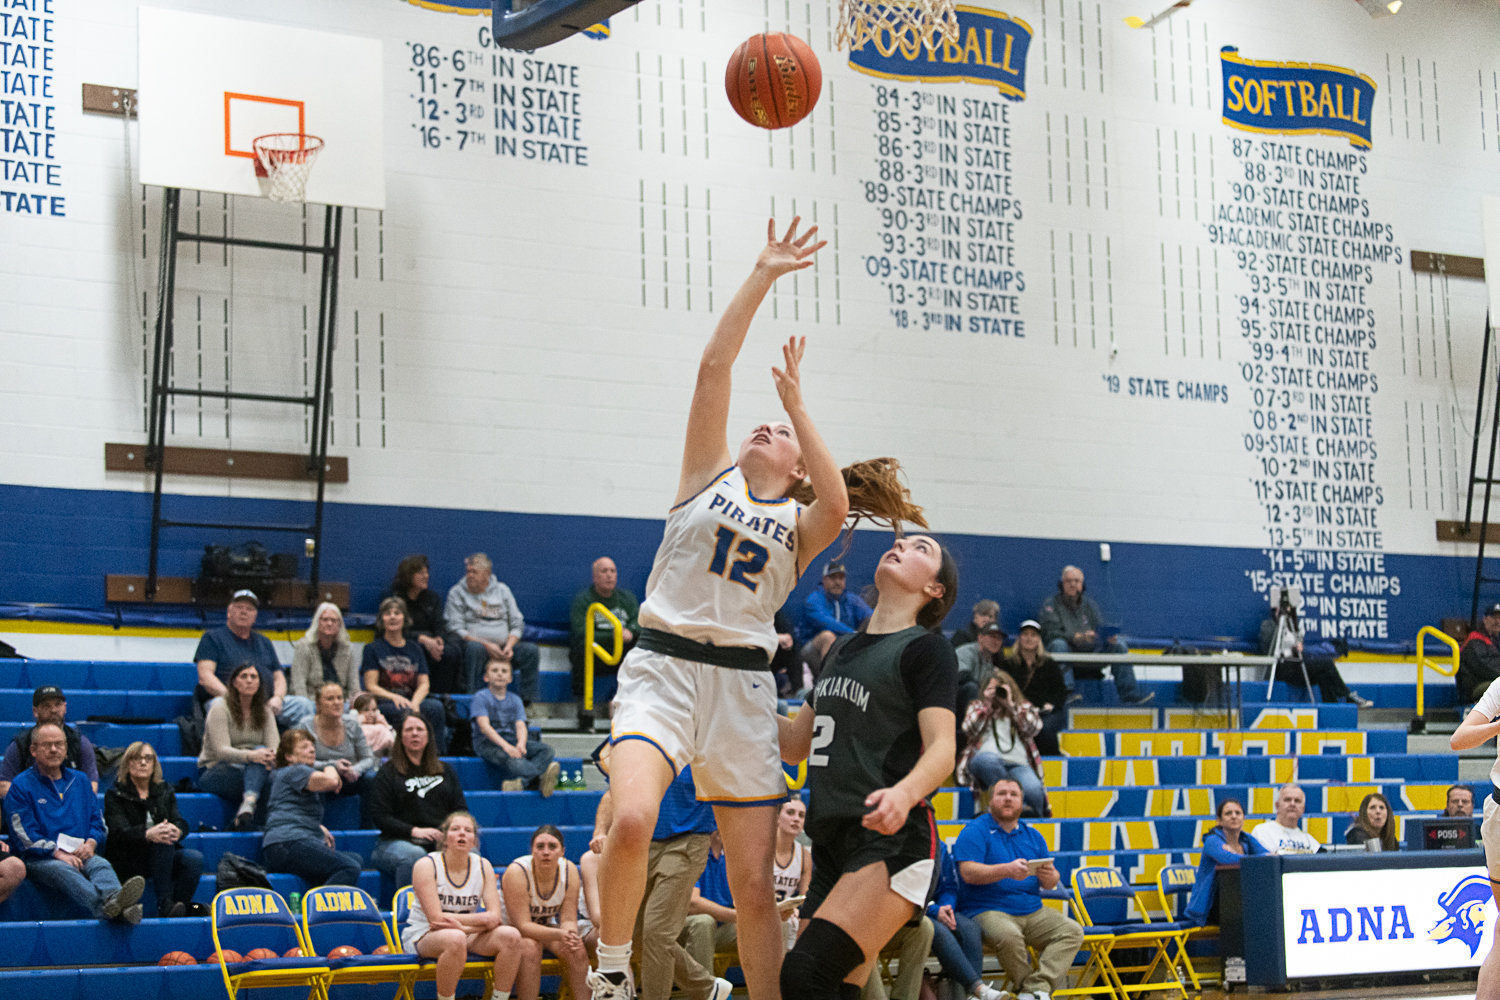 Natalie Loose puts up a transition layup during Adna's 72-28 win over Wahkiakum on Jan. 13.